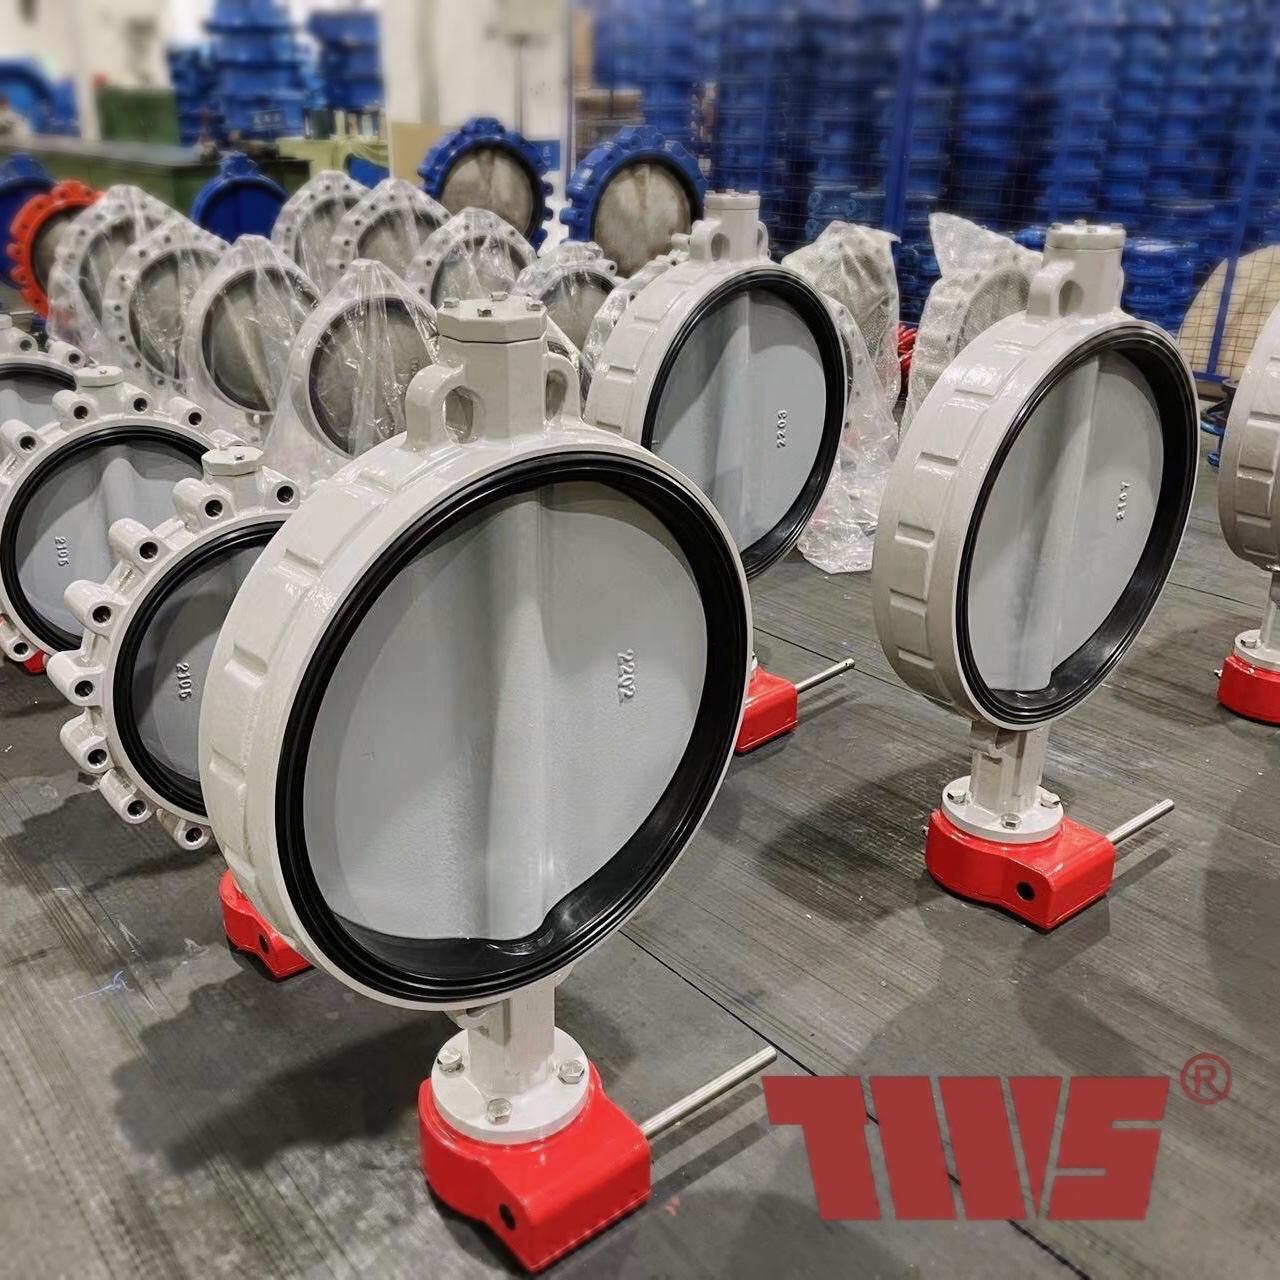 What are the options for butterfly valve surface coating? What are the characteristics of each?